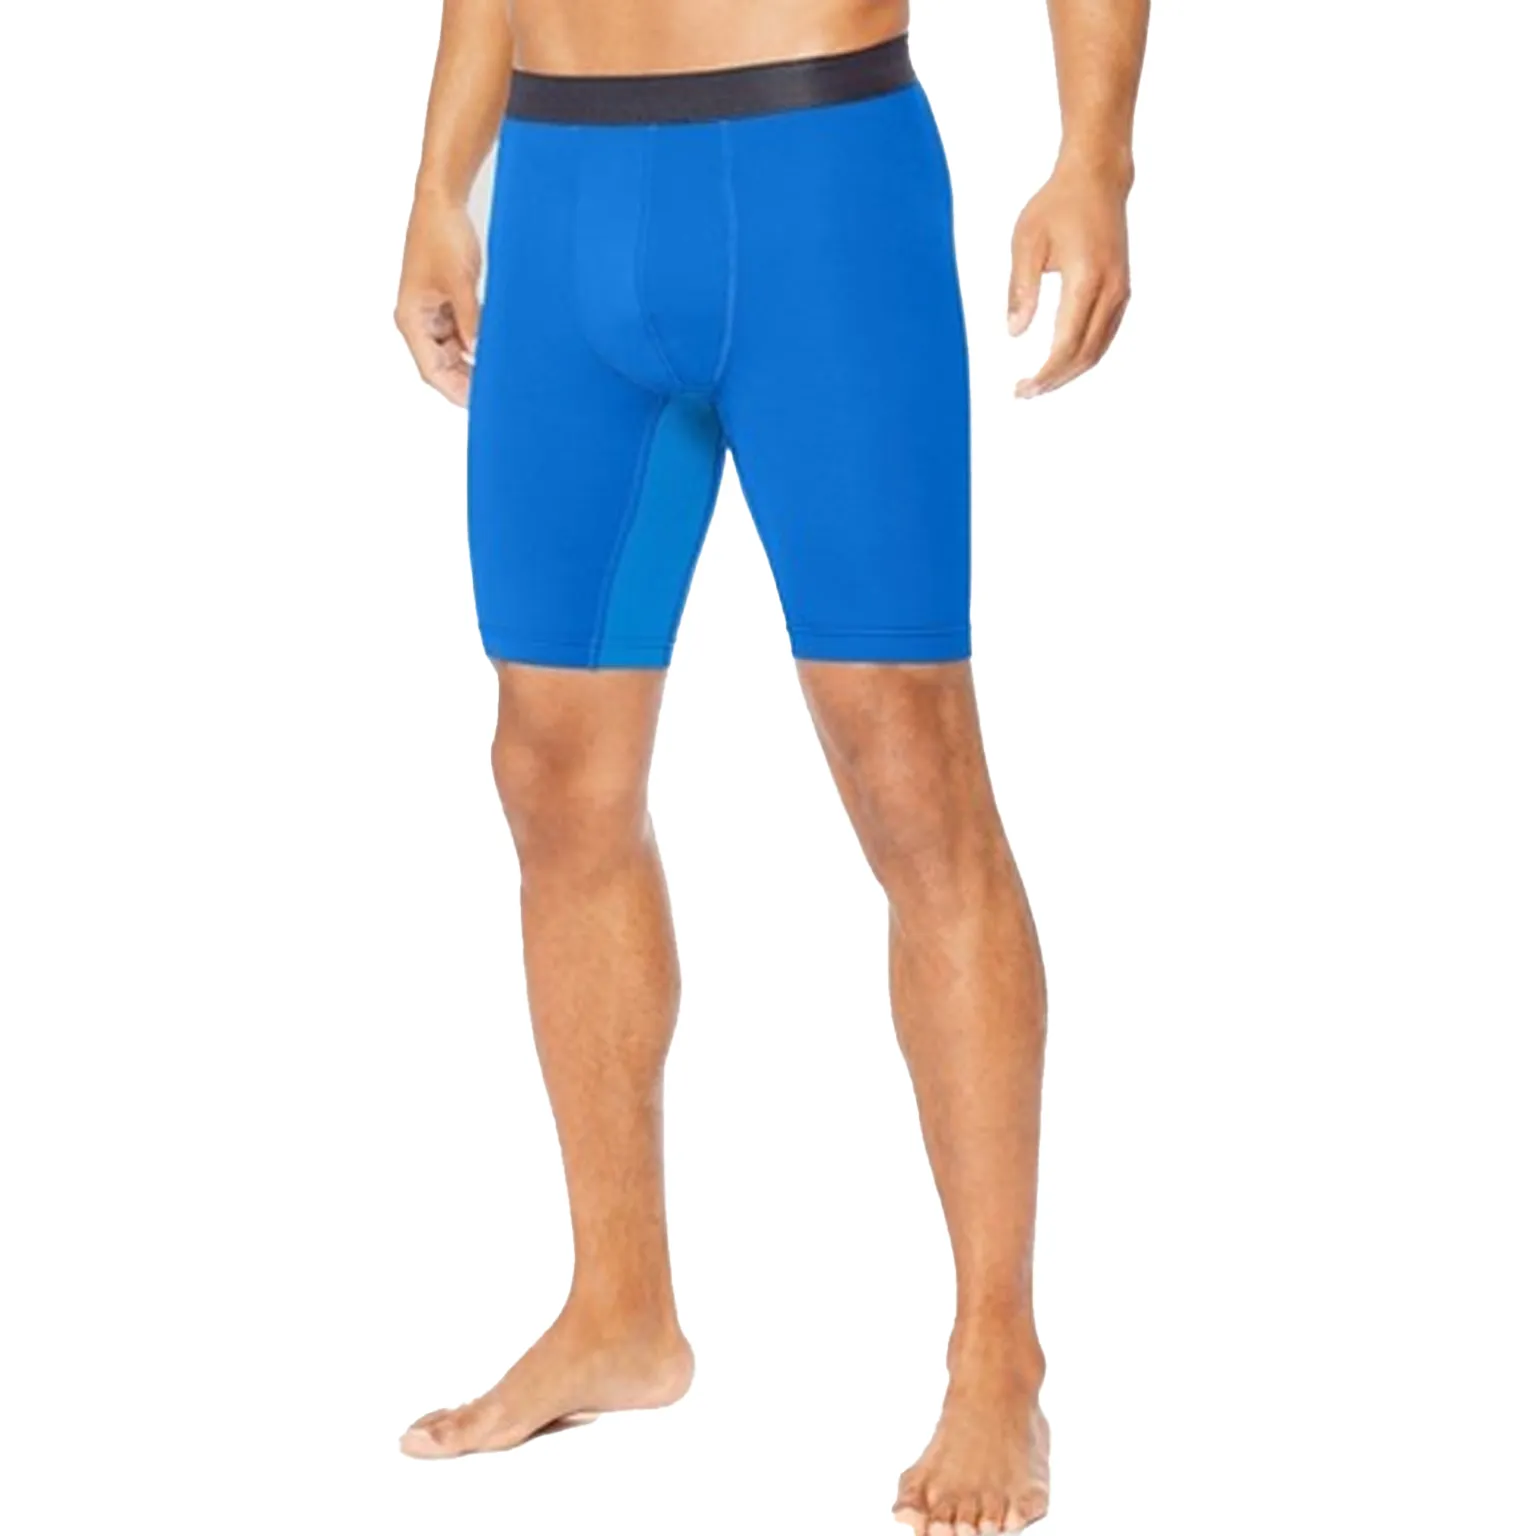 Compression Shorts Manufacturing with superior quality